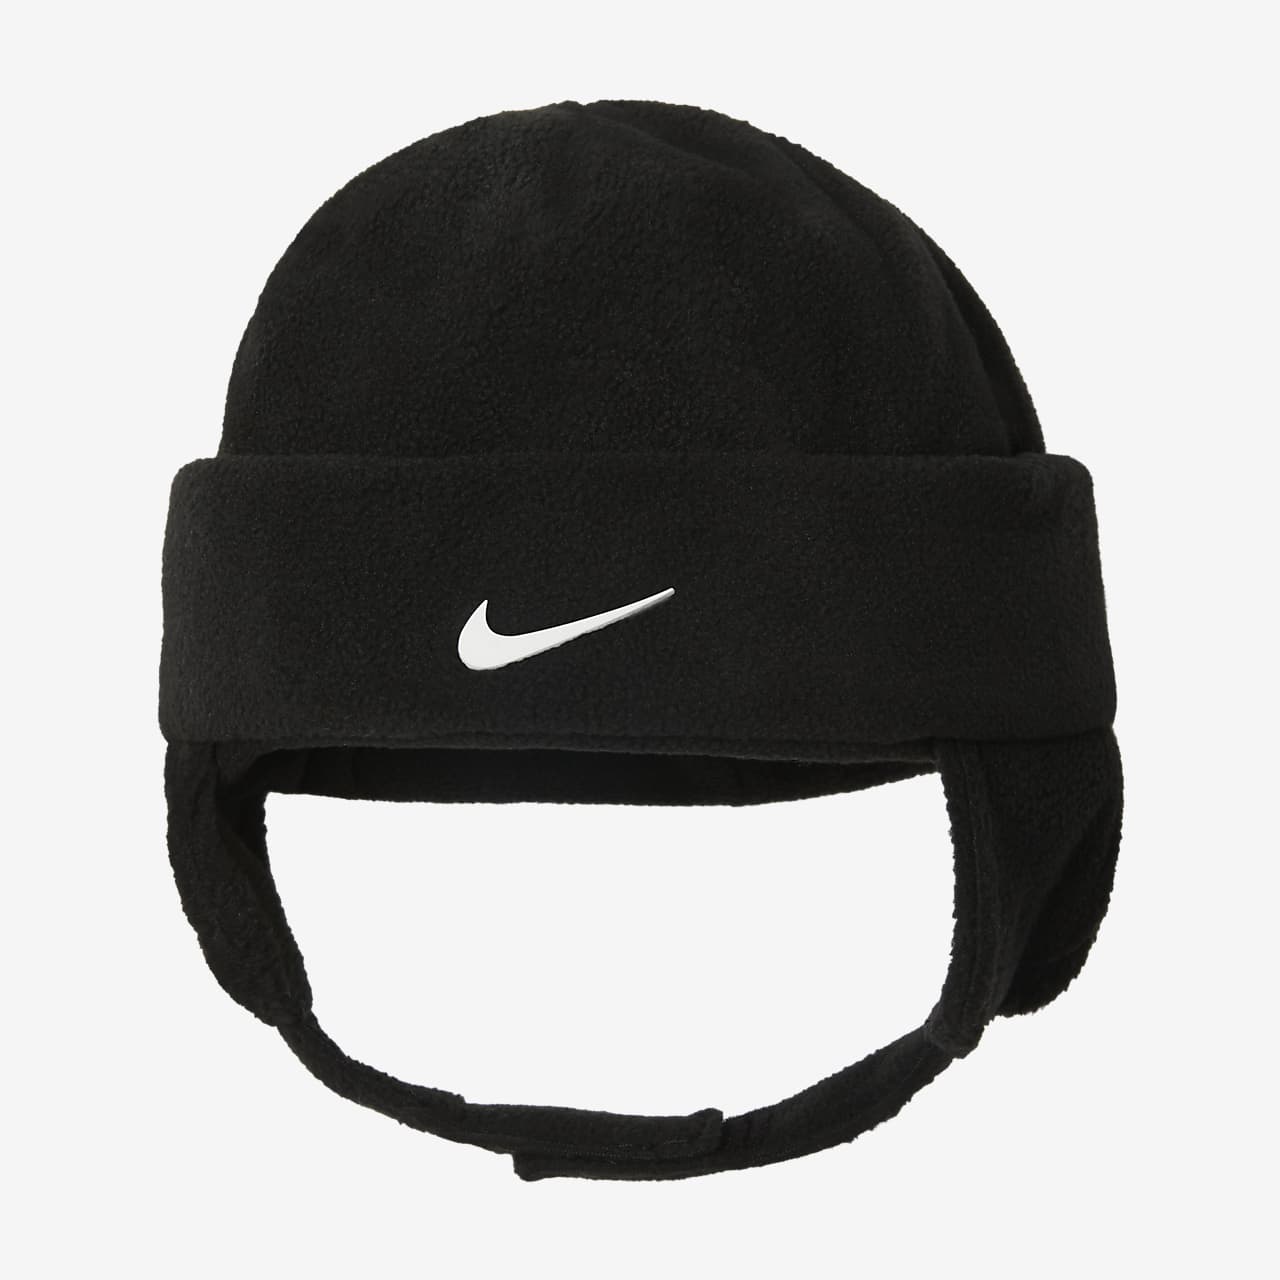 nike hat for baby boy